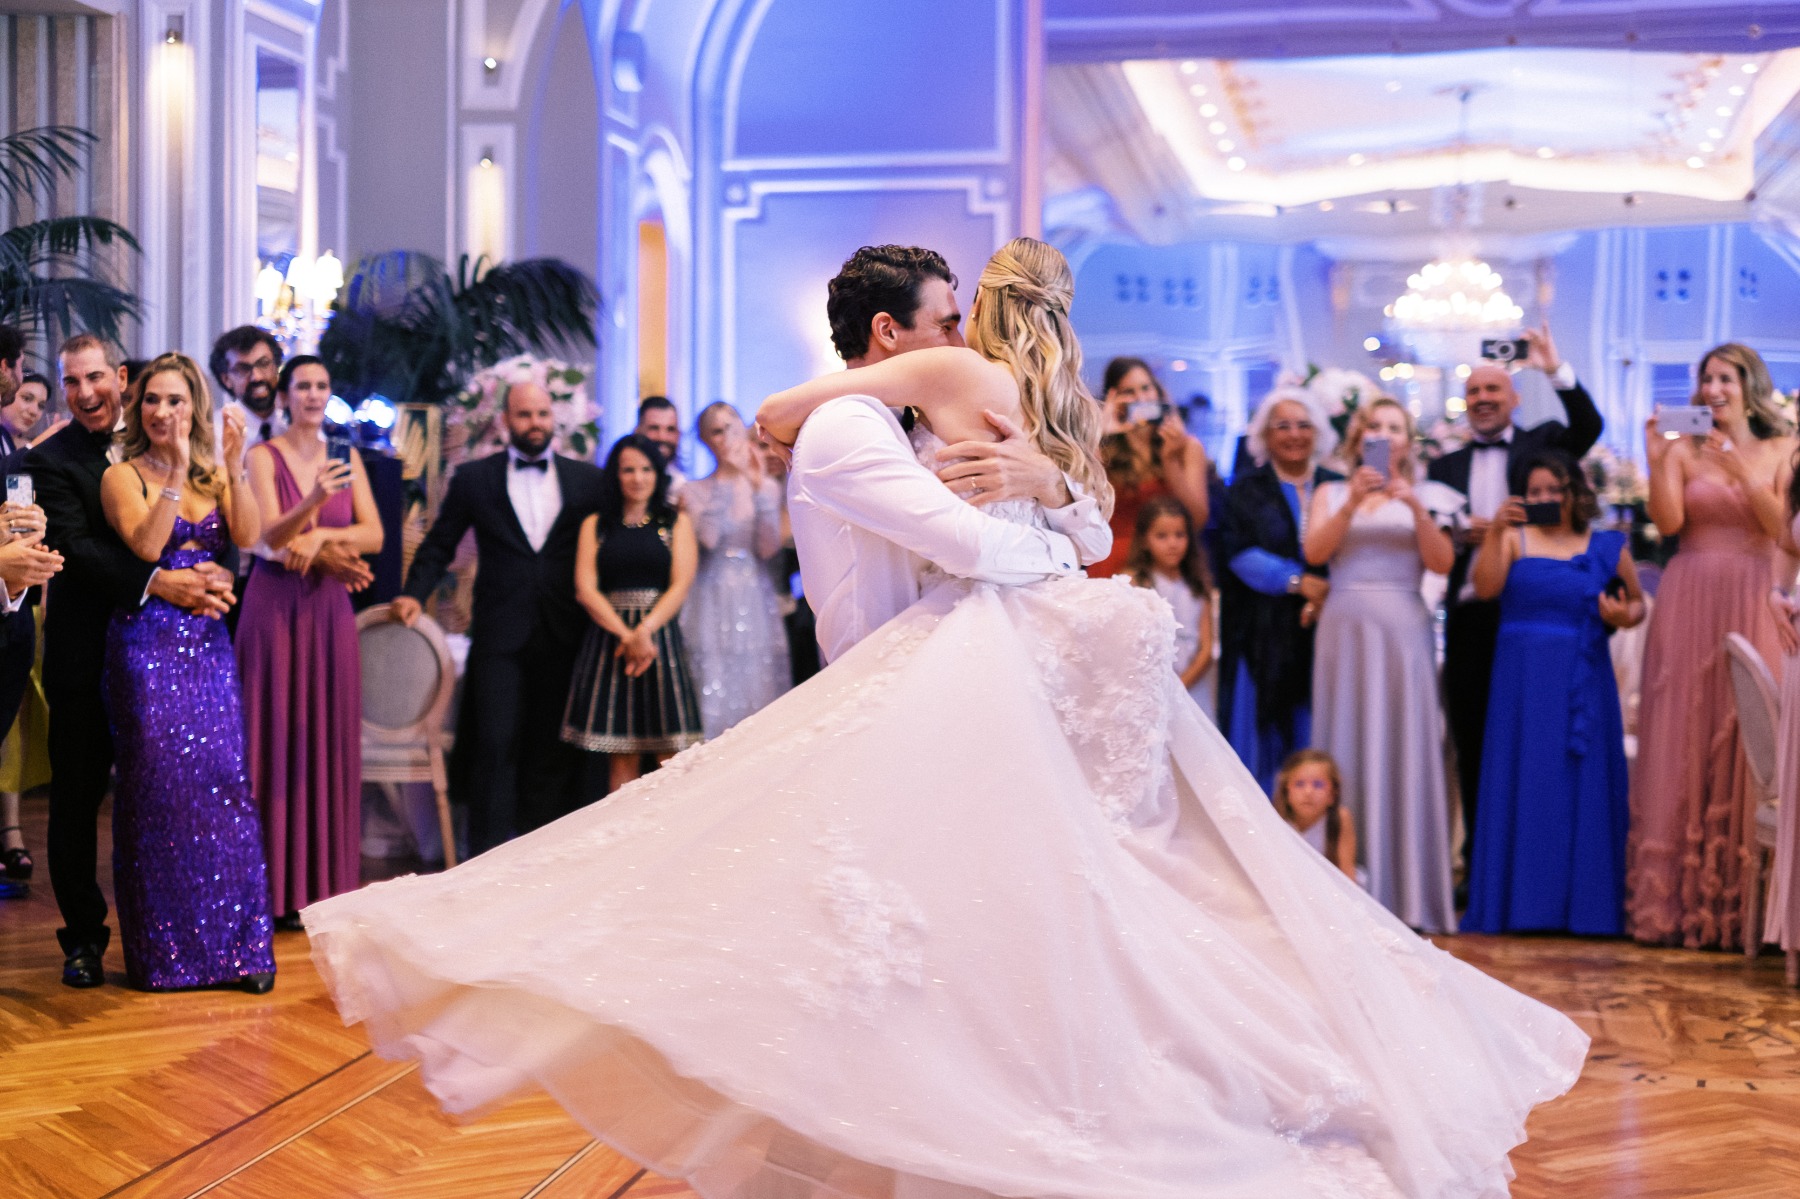 how to get the best first dance photos